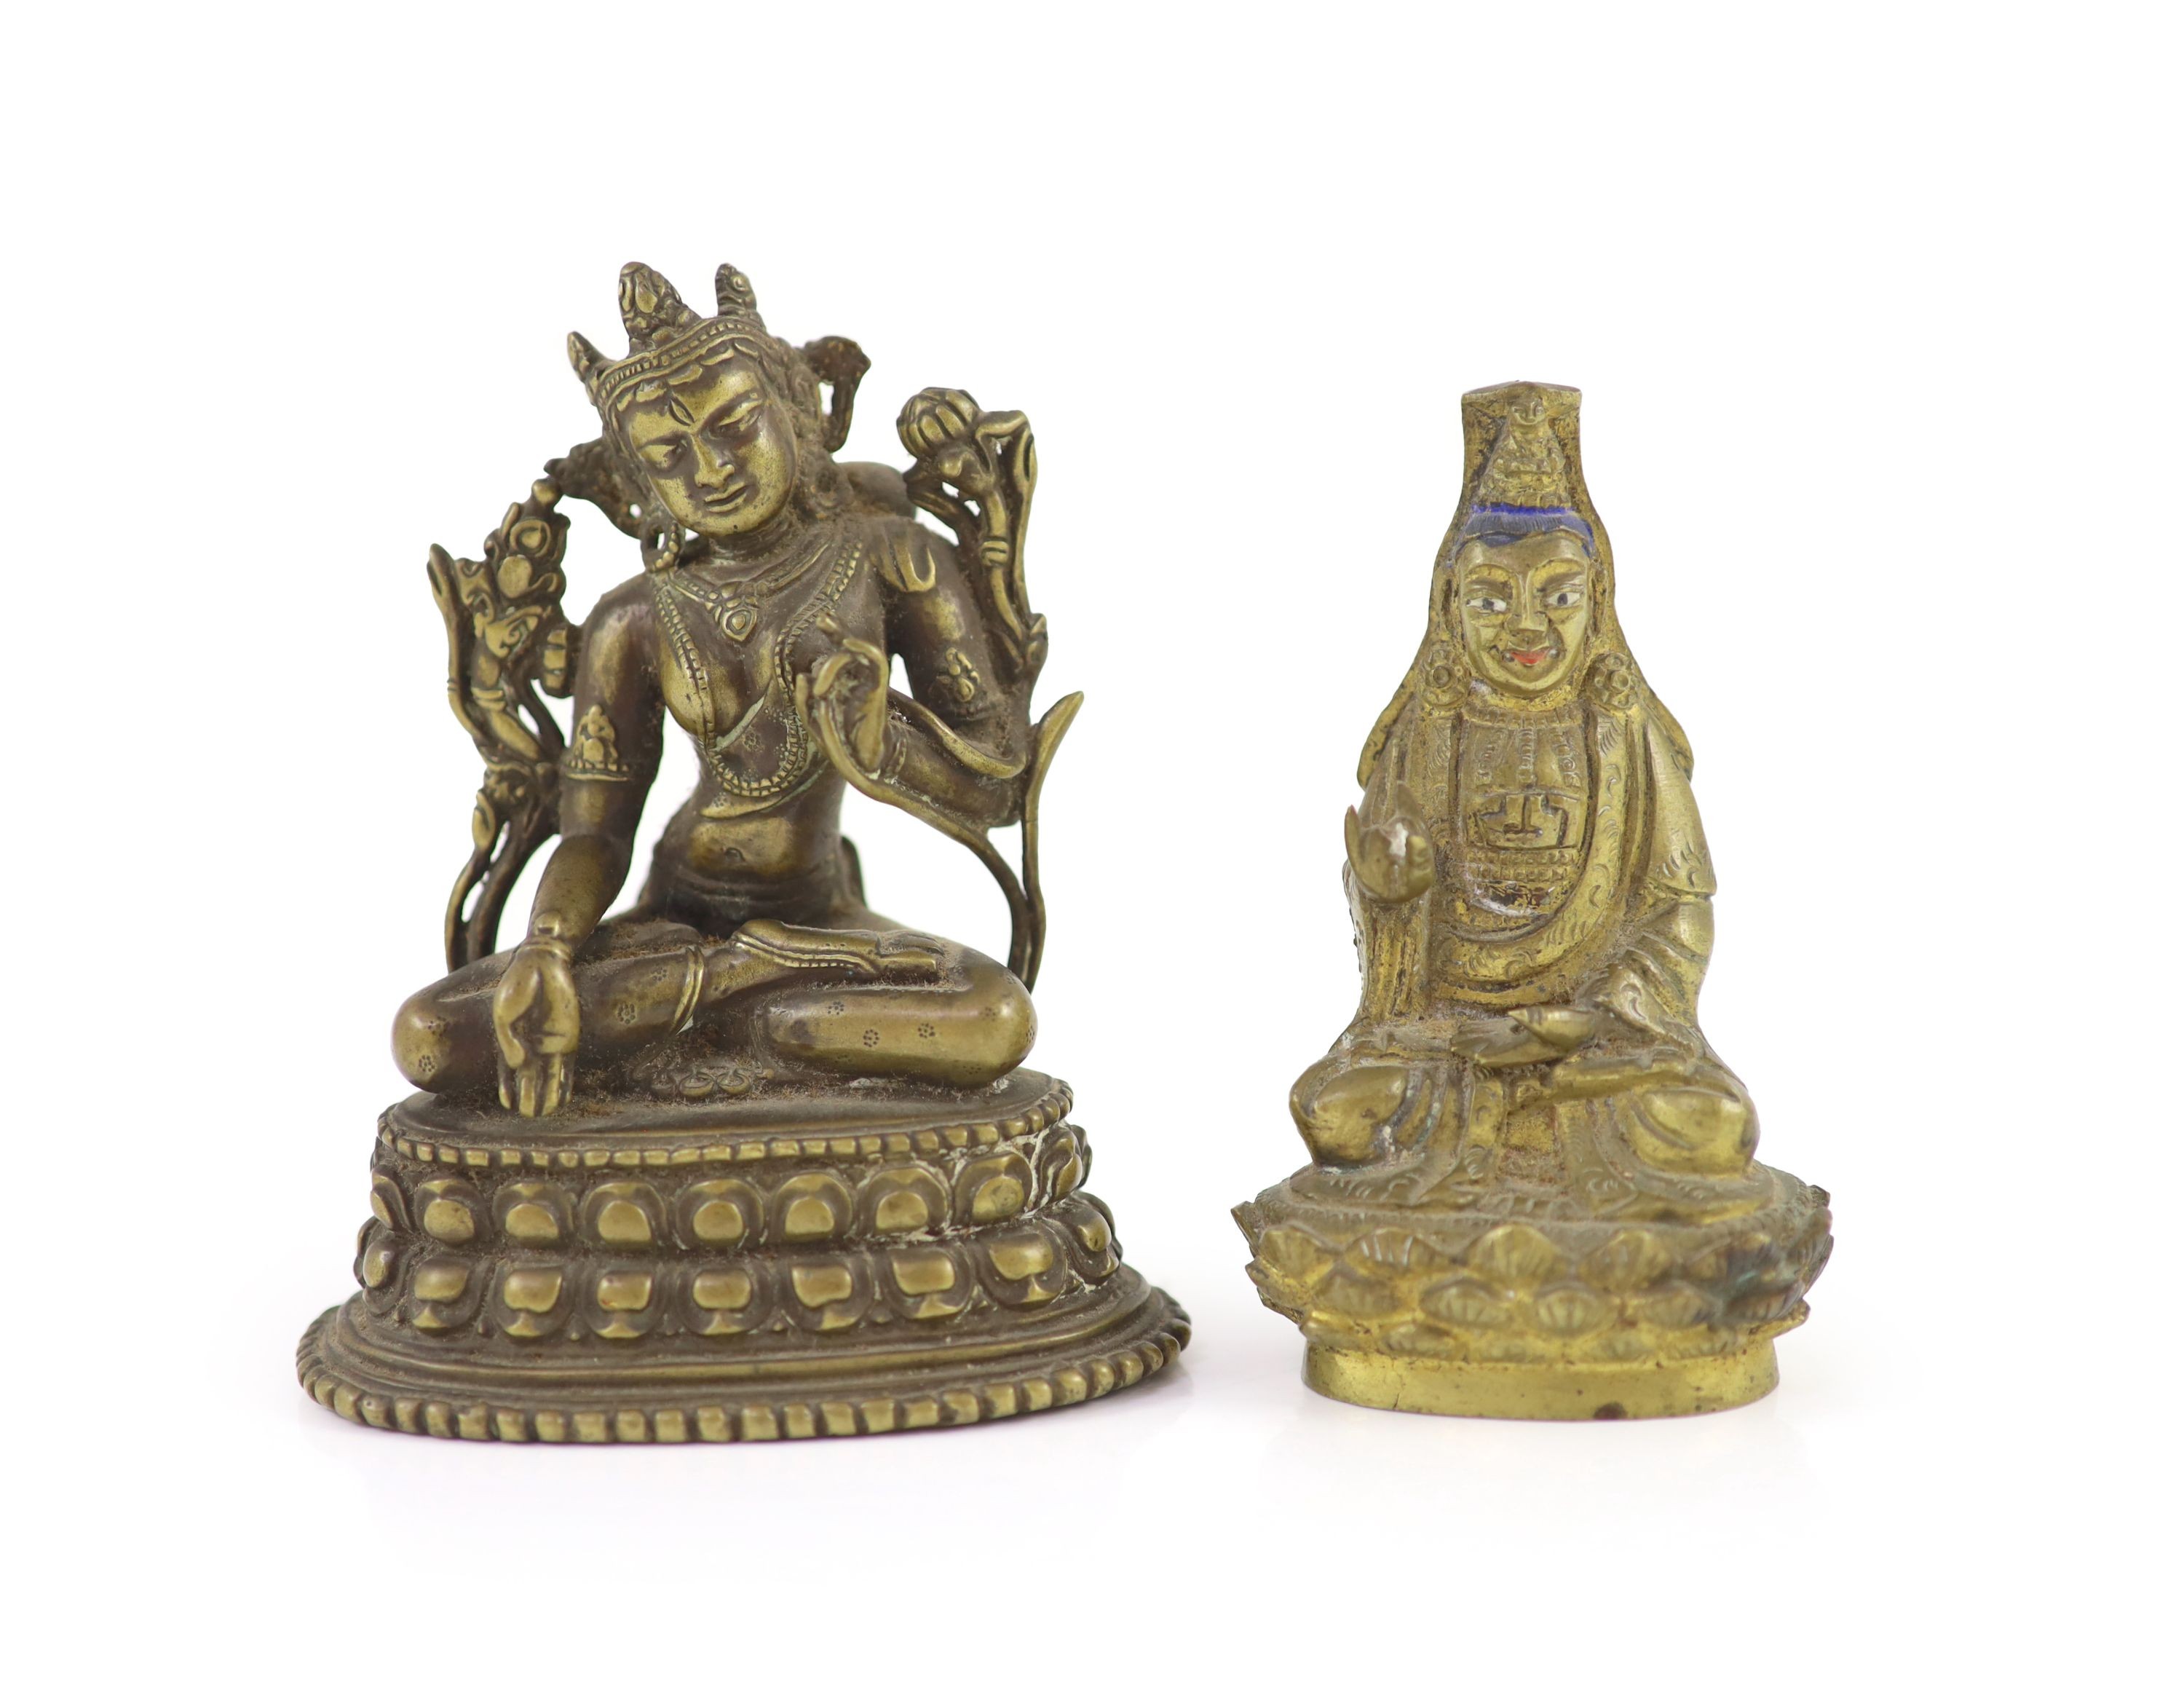 Two Himalayan bronze figures of Bodhisattvas, 19th/20th century, 11.5 and 9.8cm high